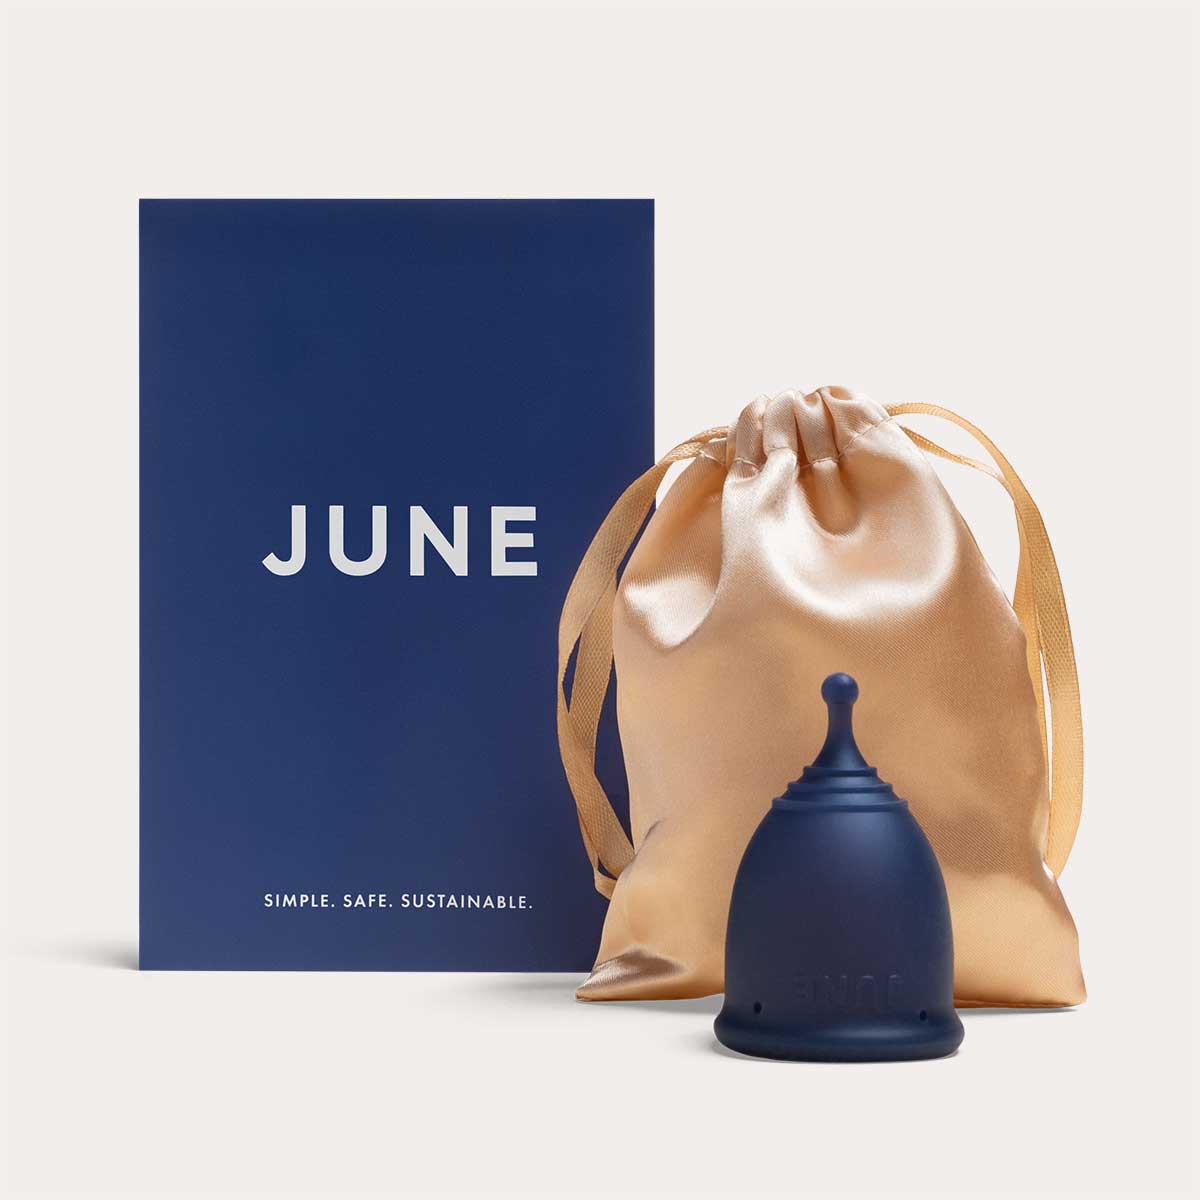 The June Menstrual Cup - Firm